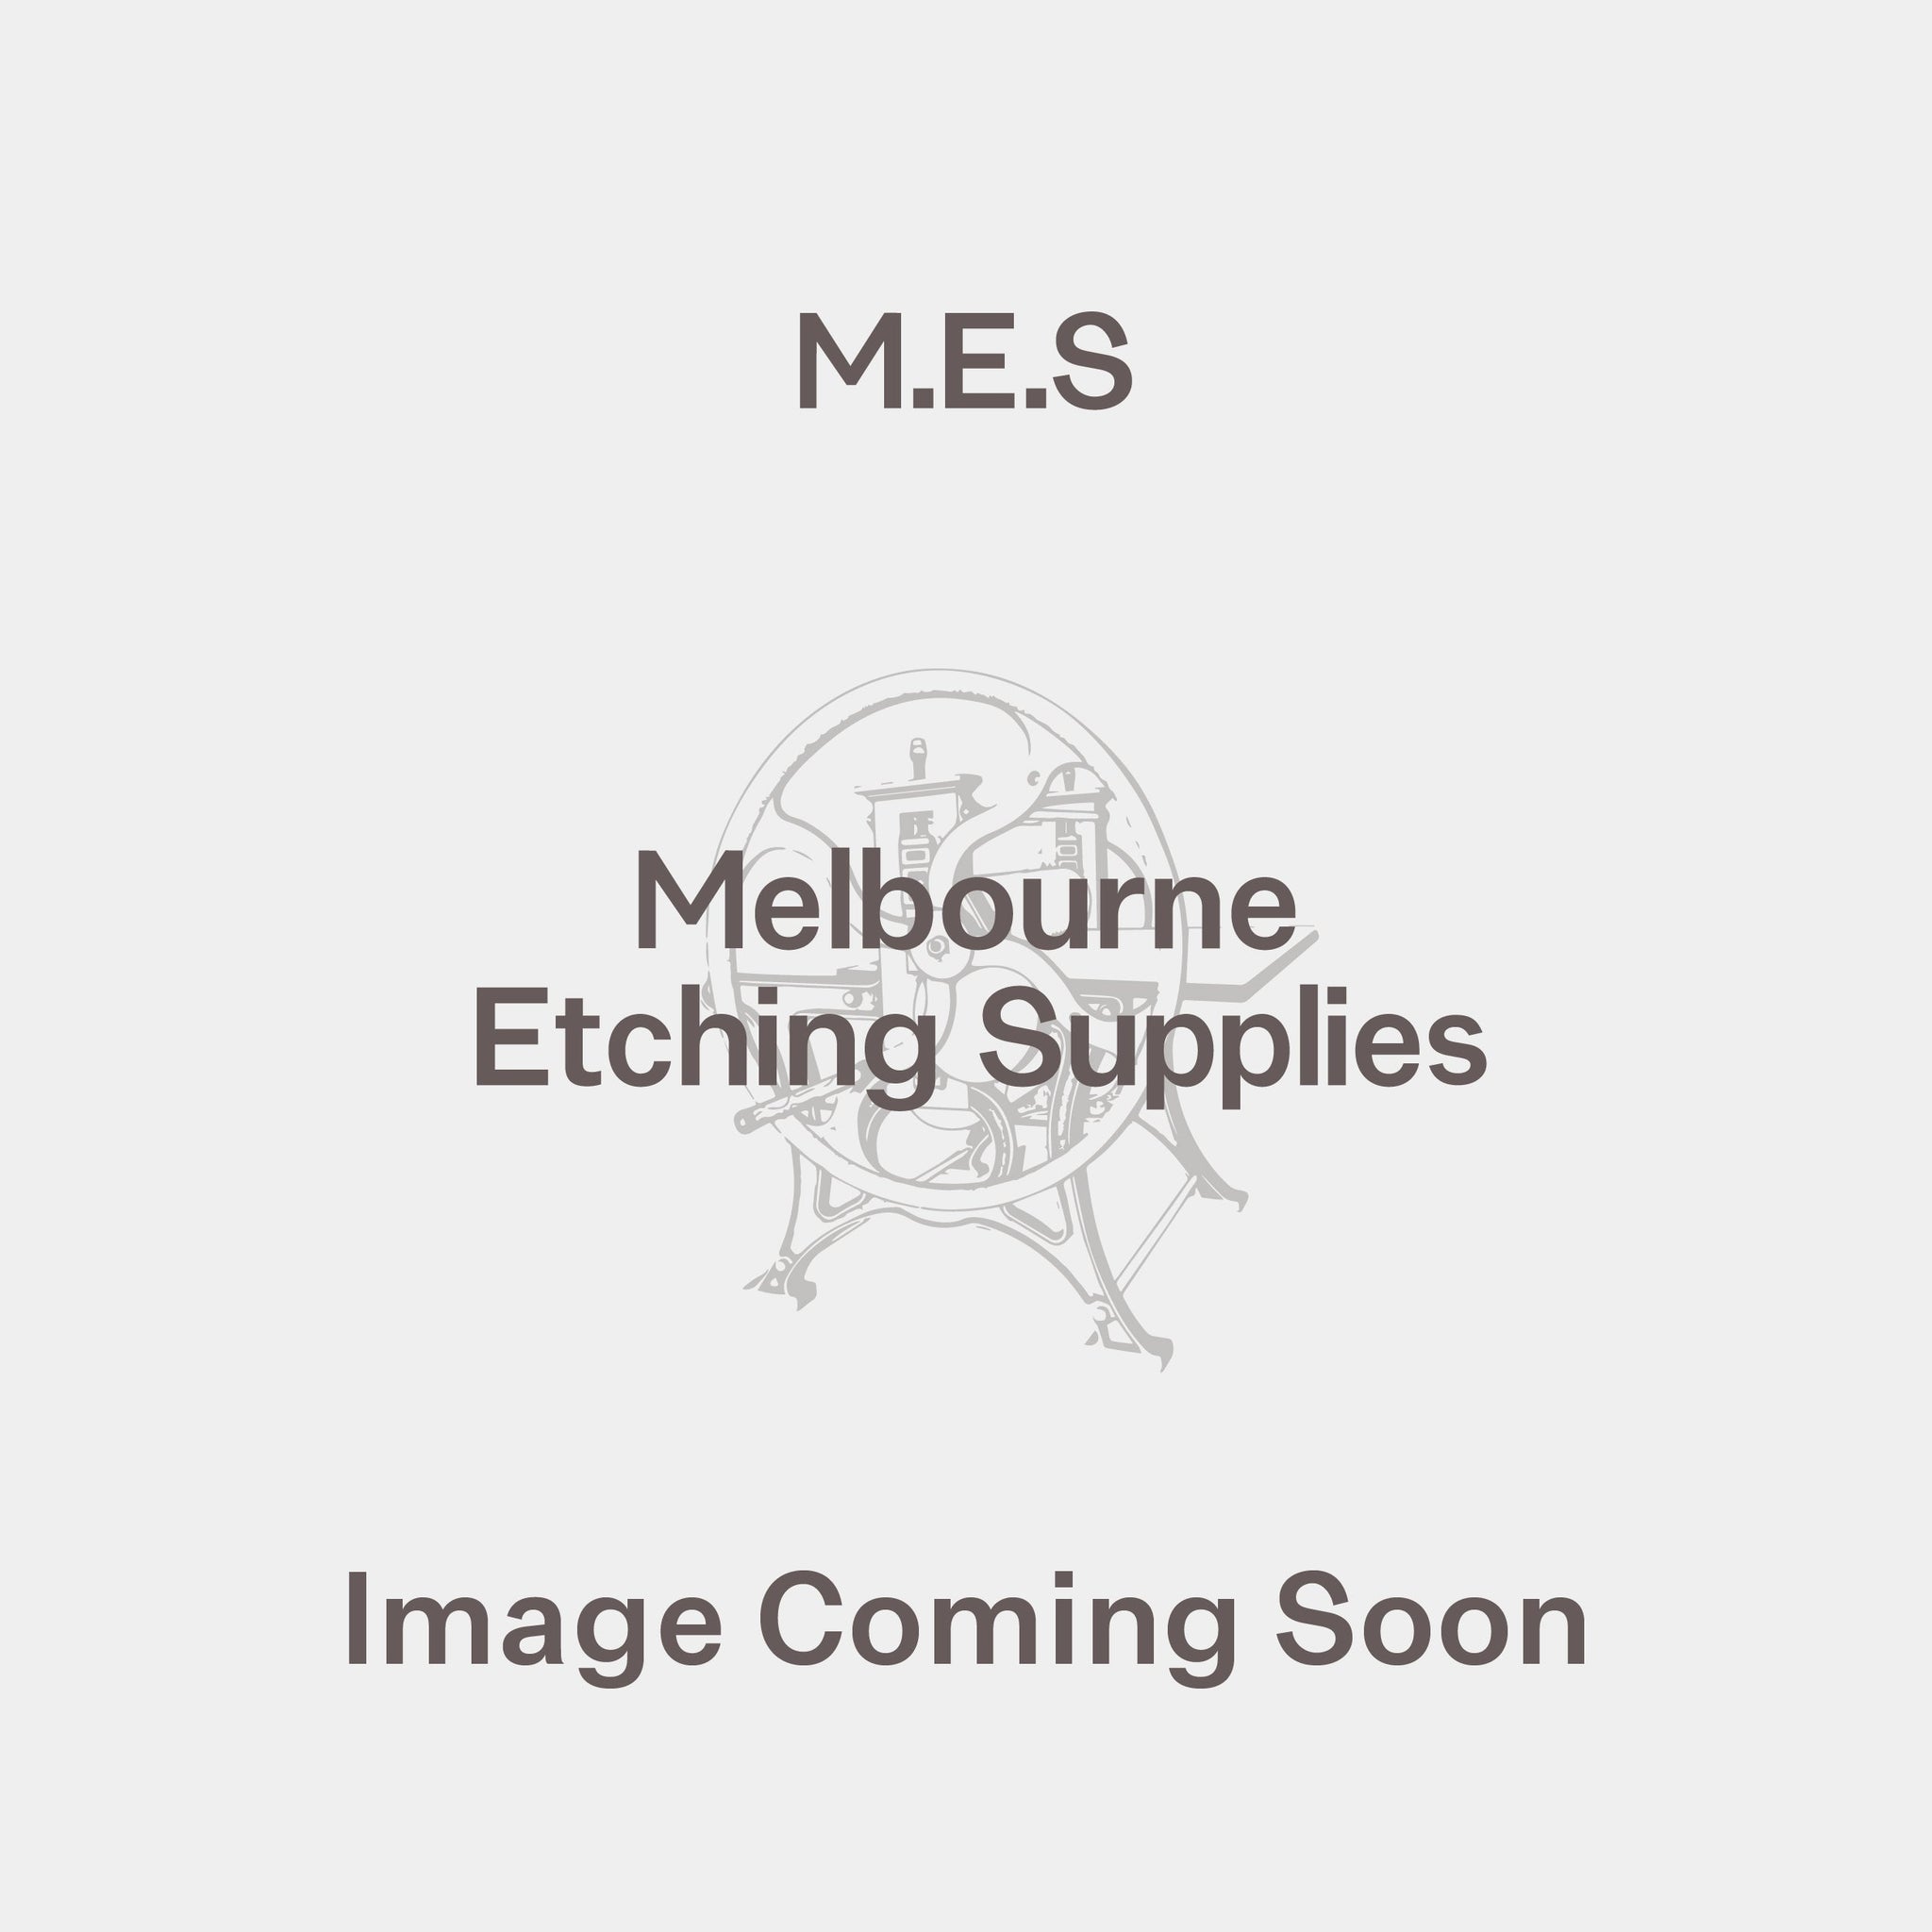 Lascaux Tusche Watersoluble 500ml - Melbourne Etching Supplies